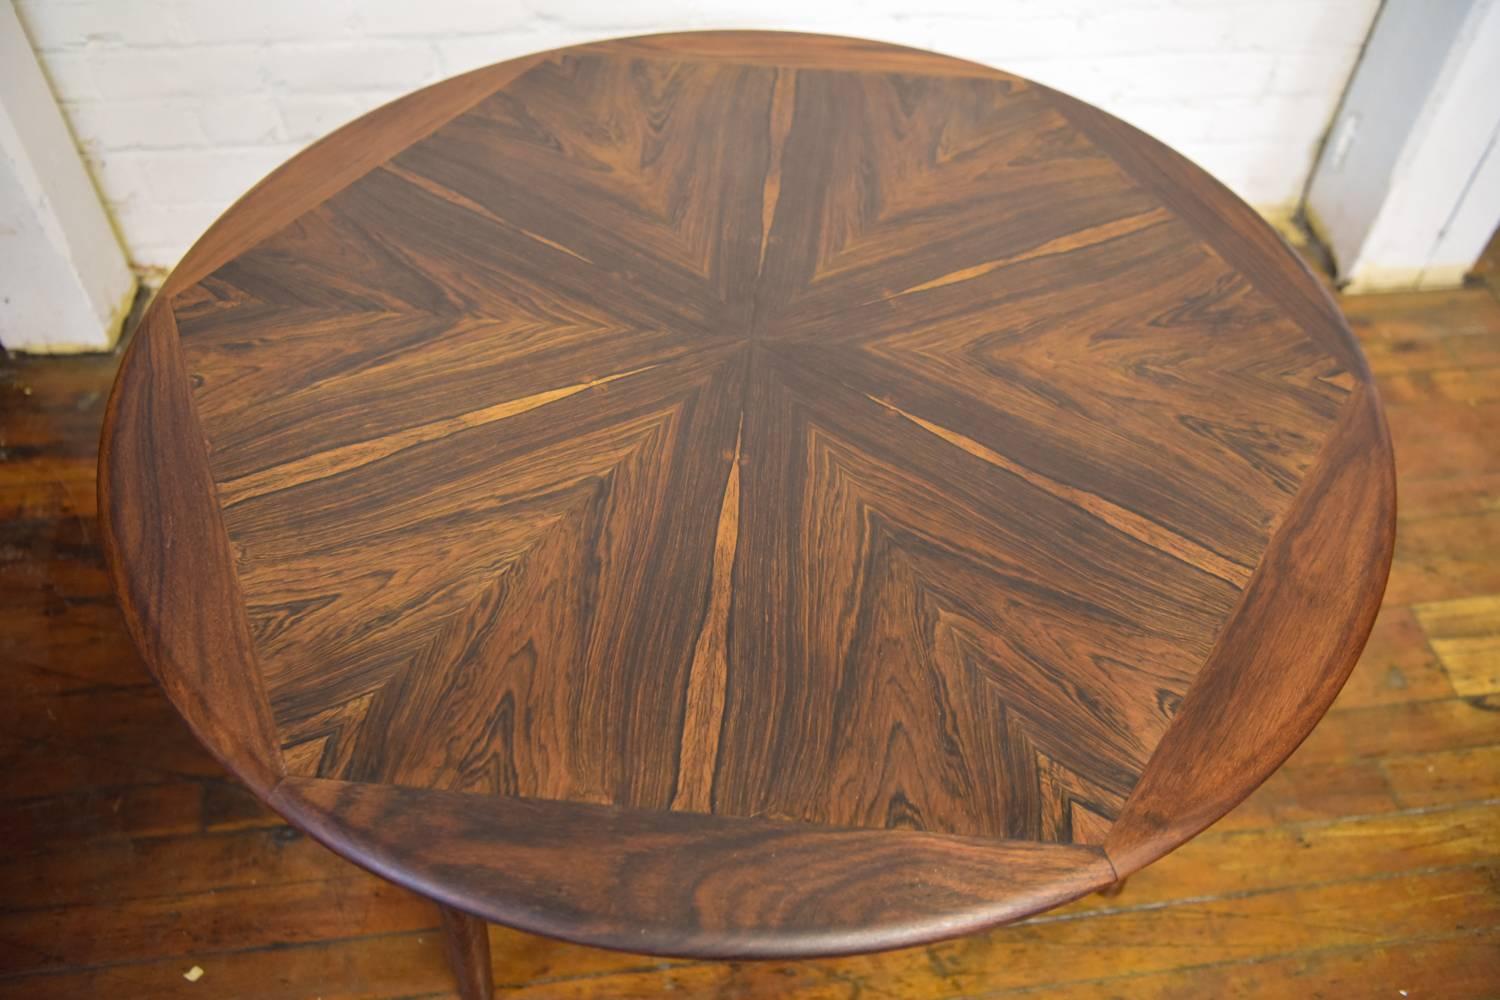 This coffee table features a stunning rosewood top, creating a beautiful pattern.